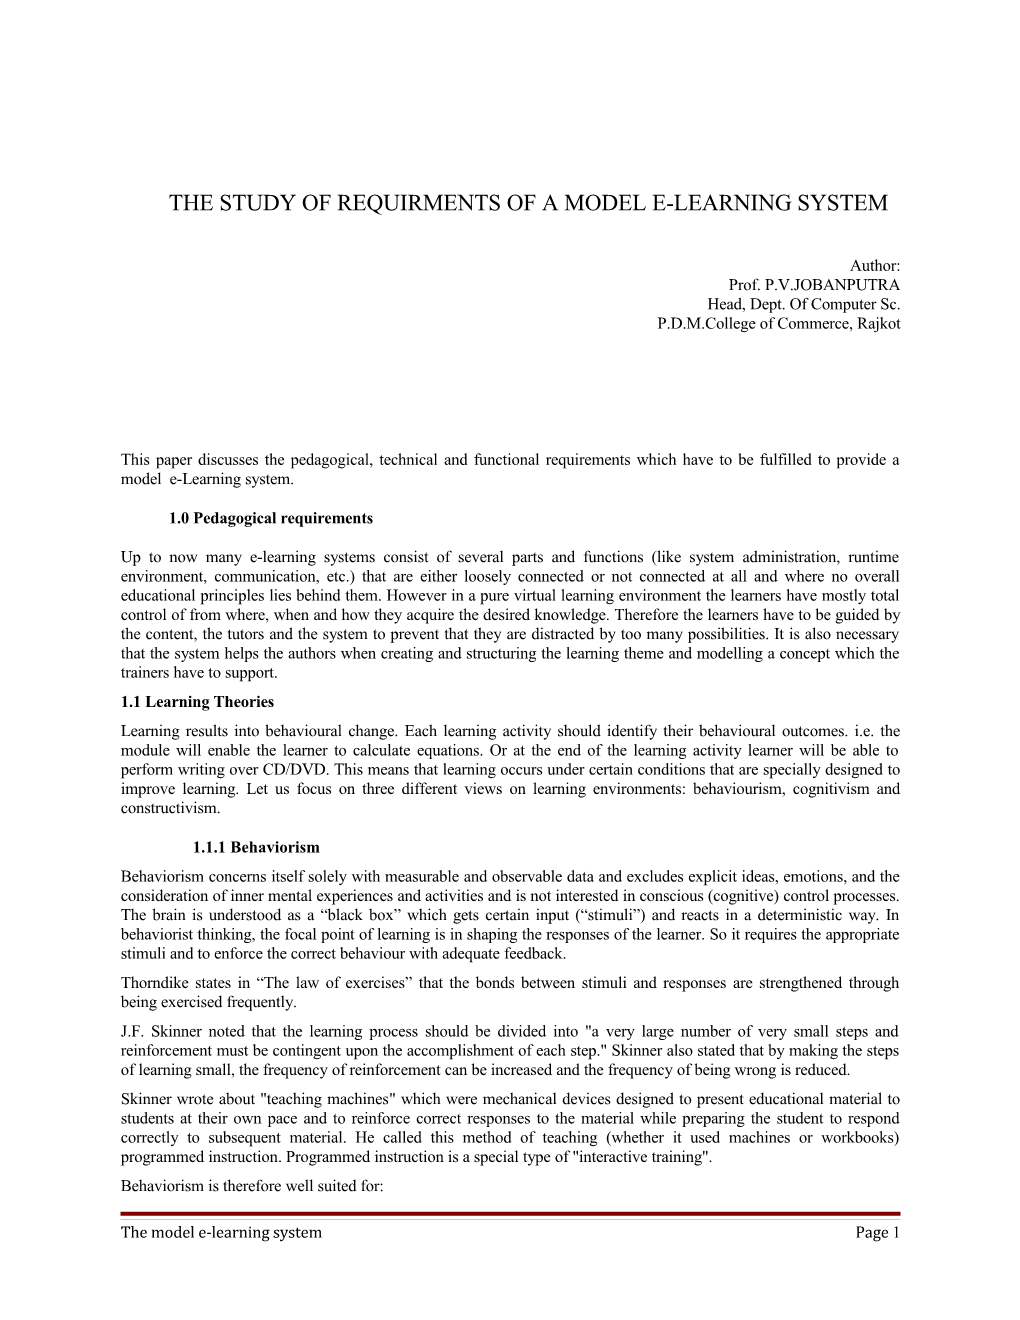 The Study of Requirments of a Model E-Learning System